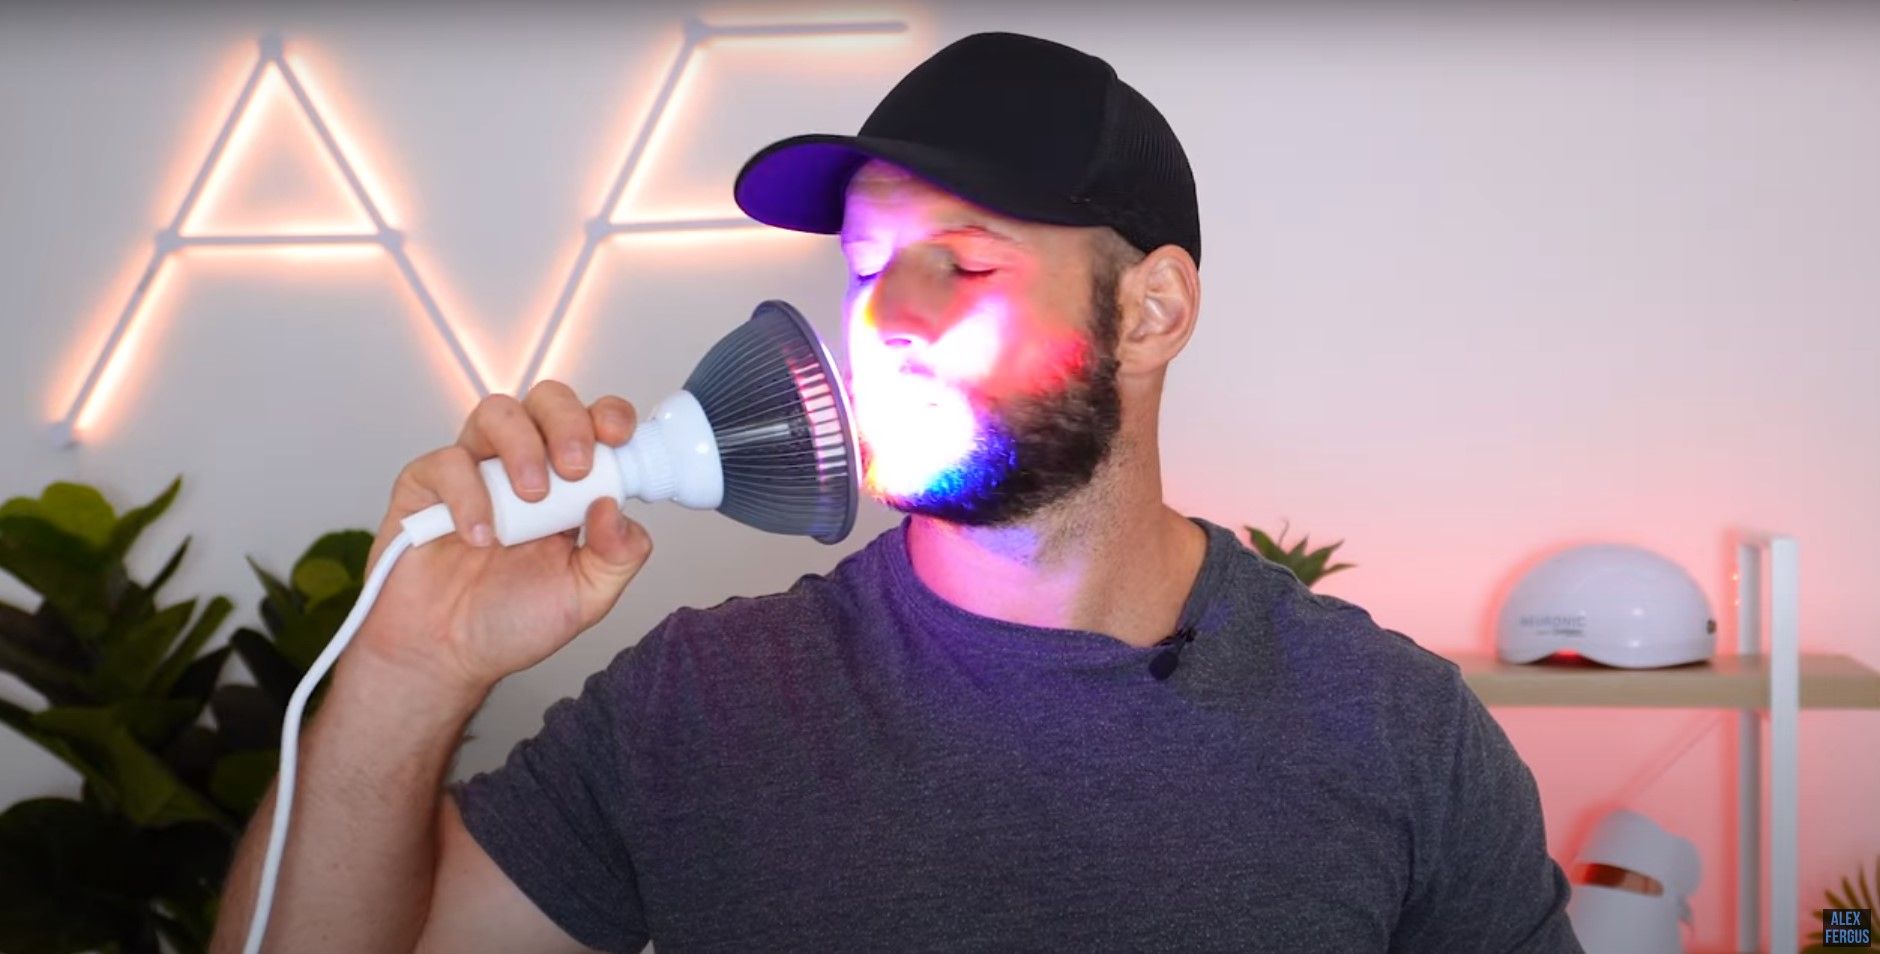 Alex shines the portable light therapy device on his face